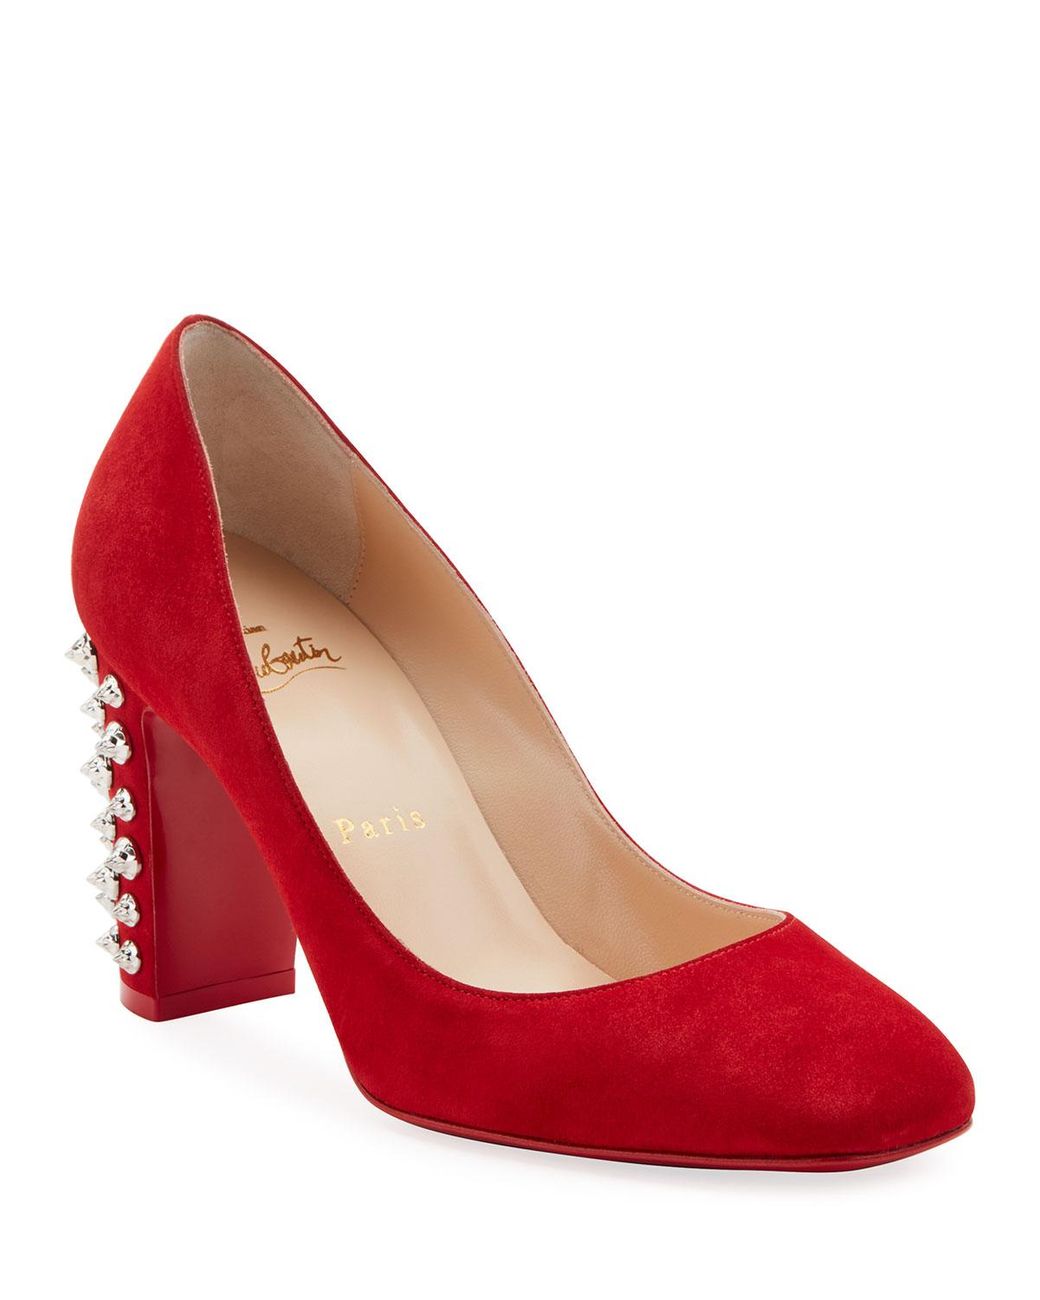 Christian Louboutin Donna Stud Spikes 85 Suede Pumps in Red - Lyst